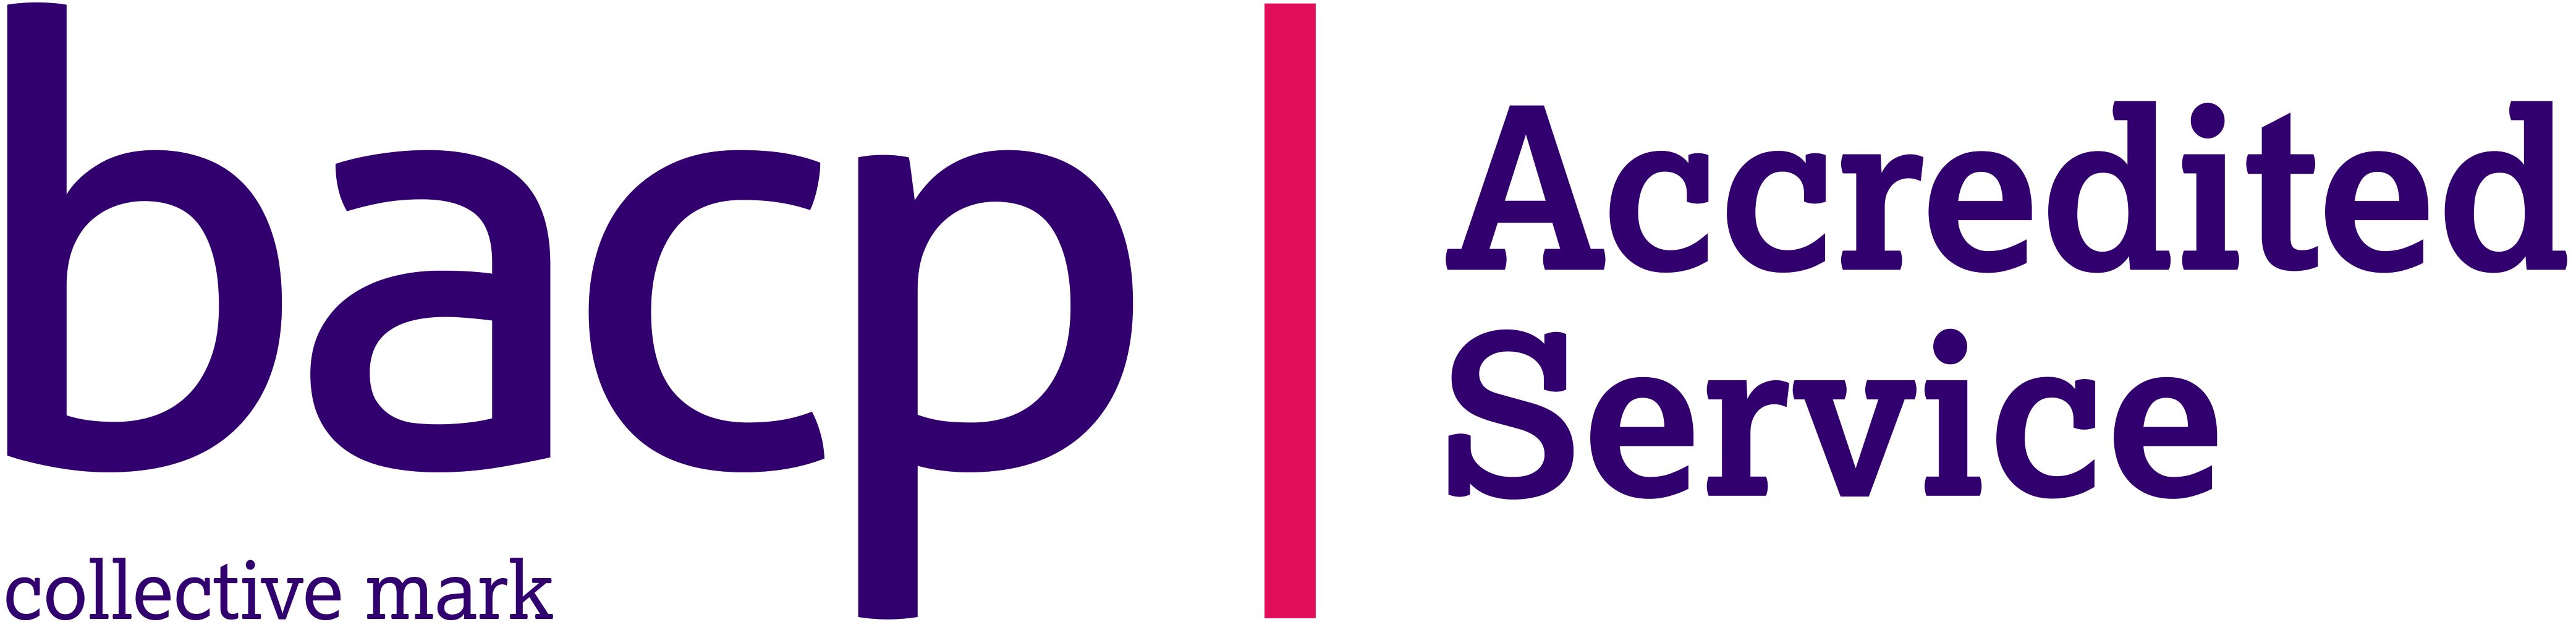 accredited service logo - British Association for Counselling and Psychotherapy